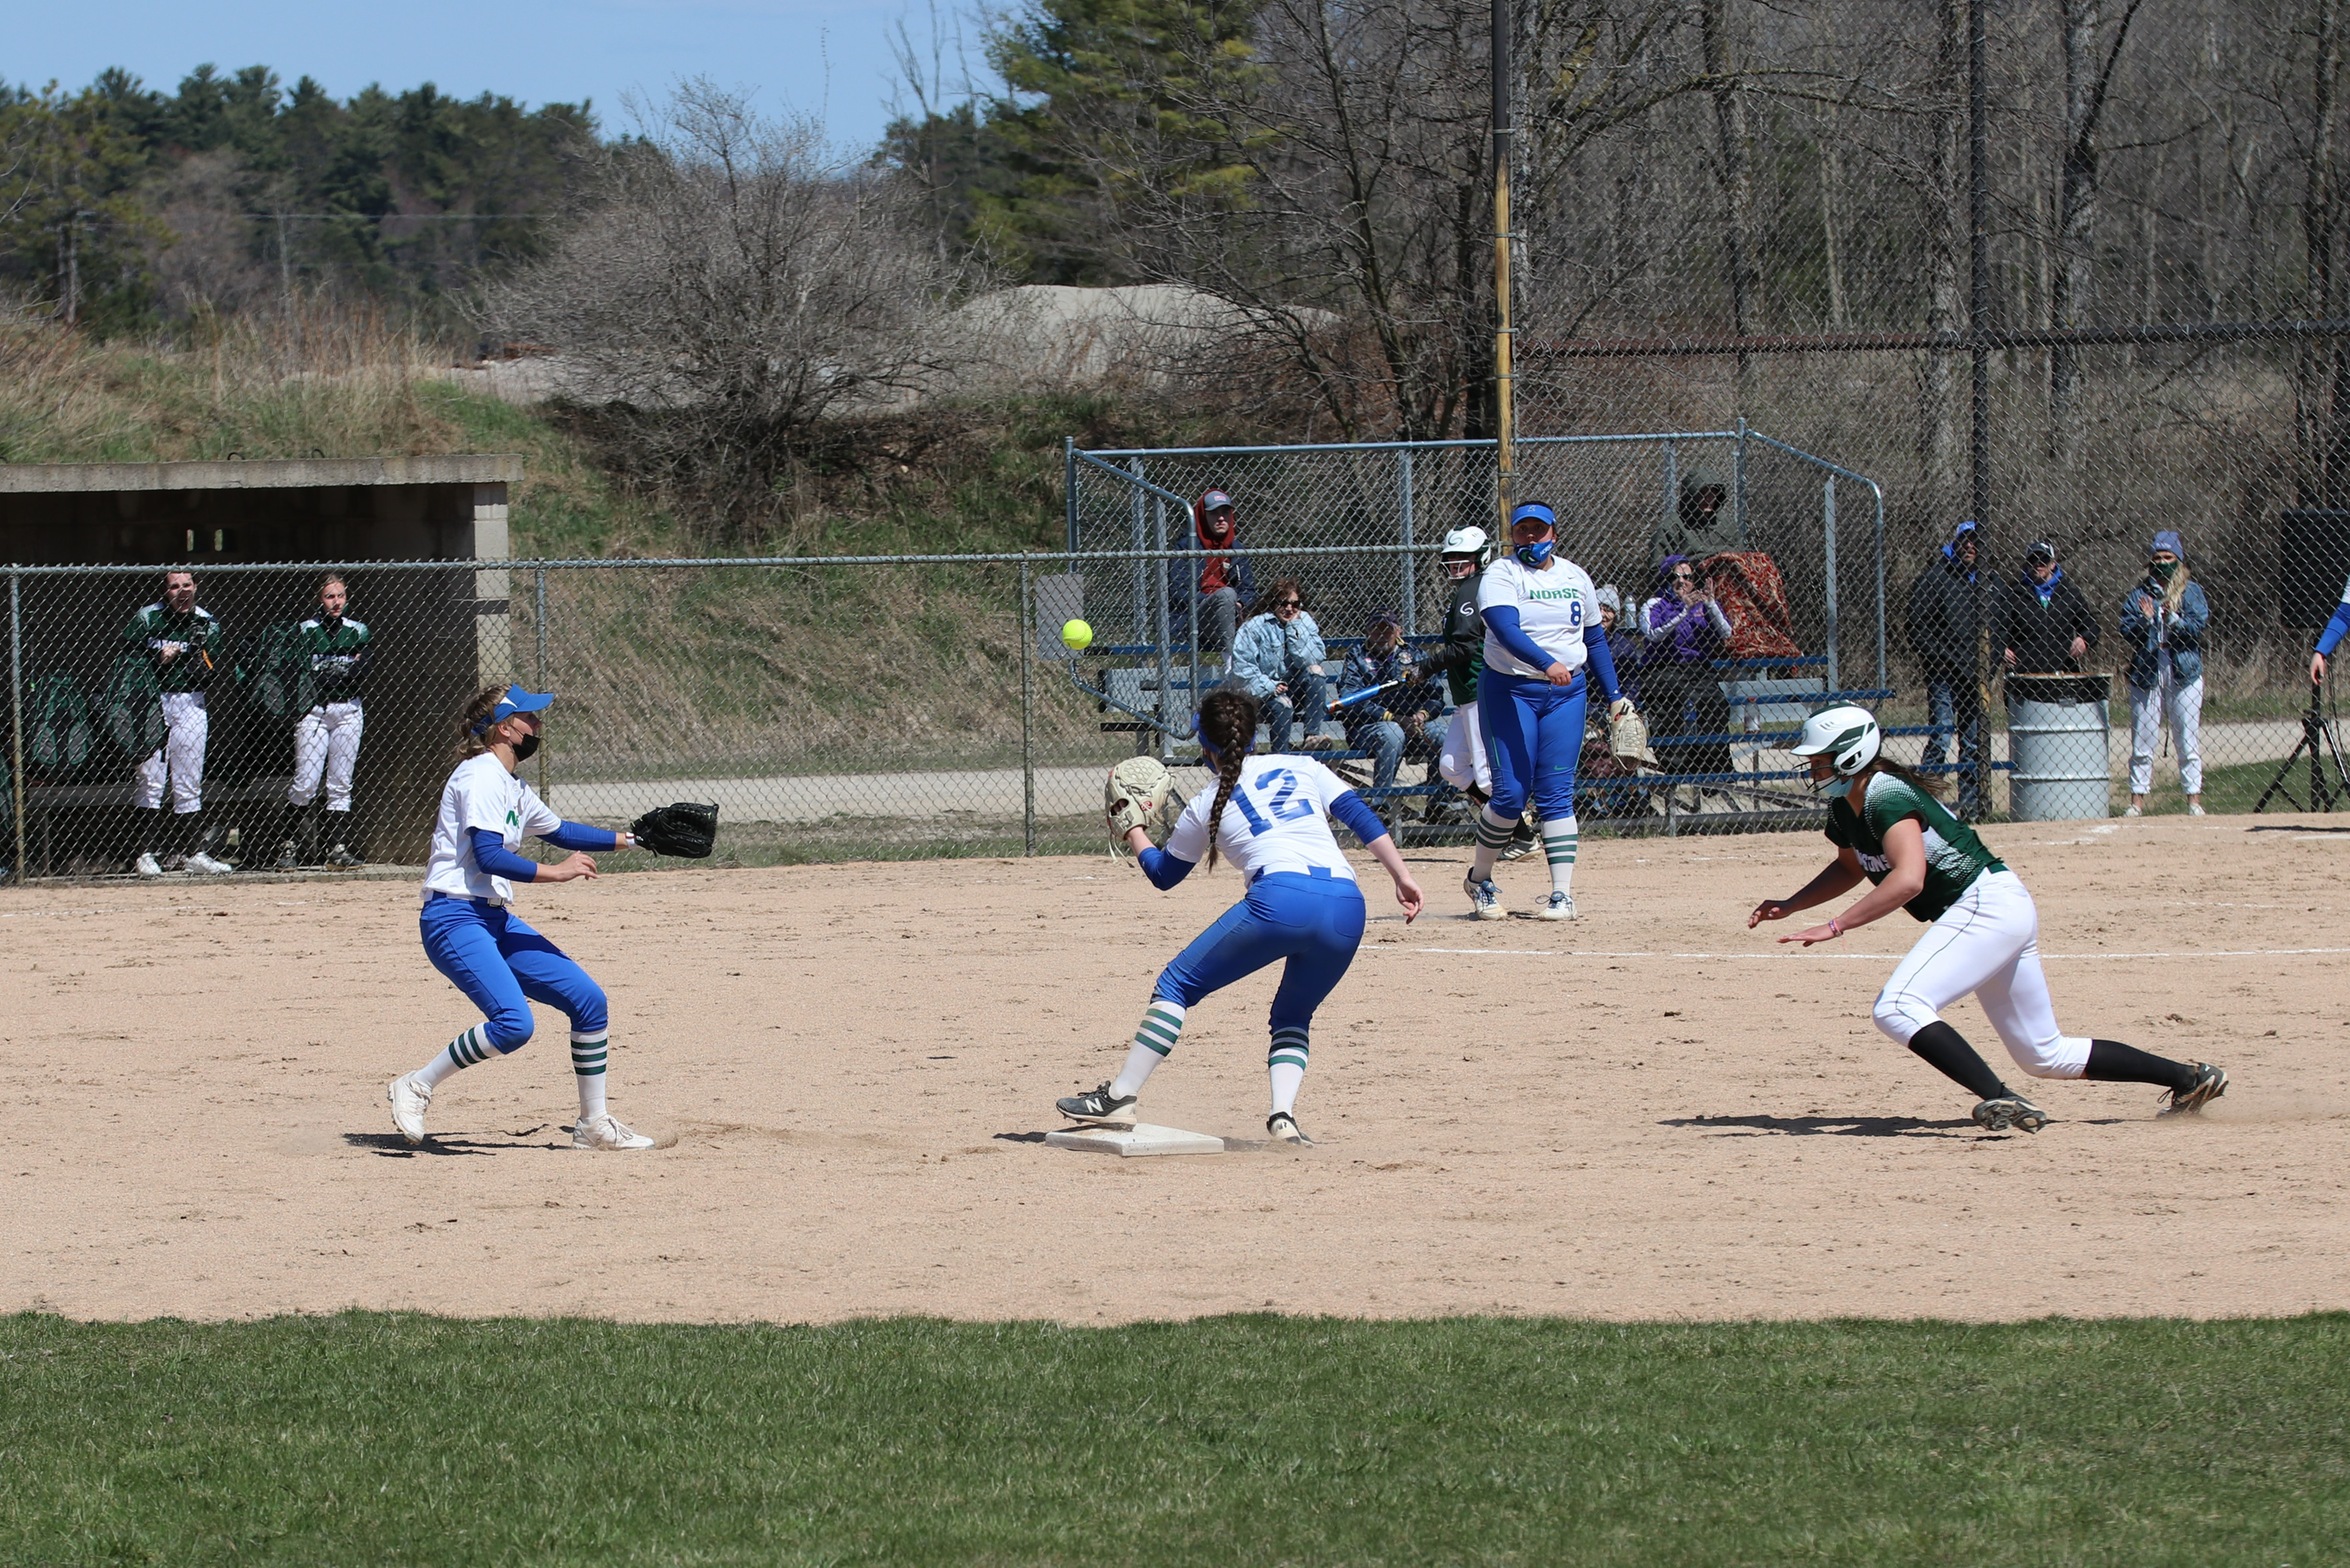 Karlie Patron throws to Sarah Wynn at second in an attempt to double off a runner